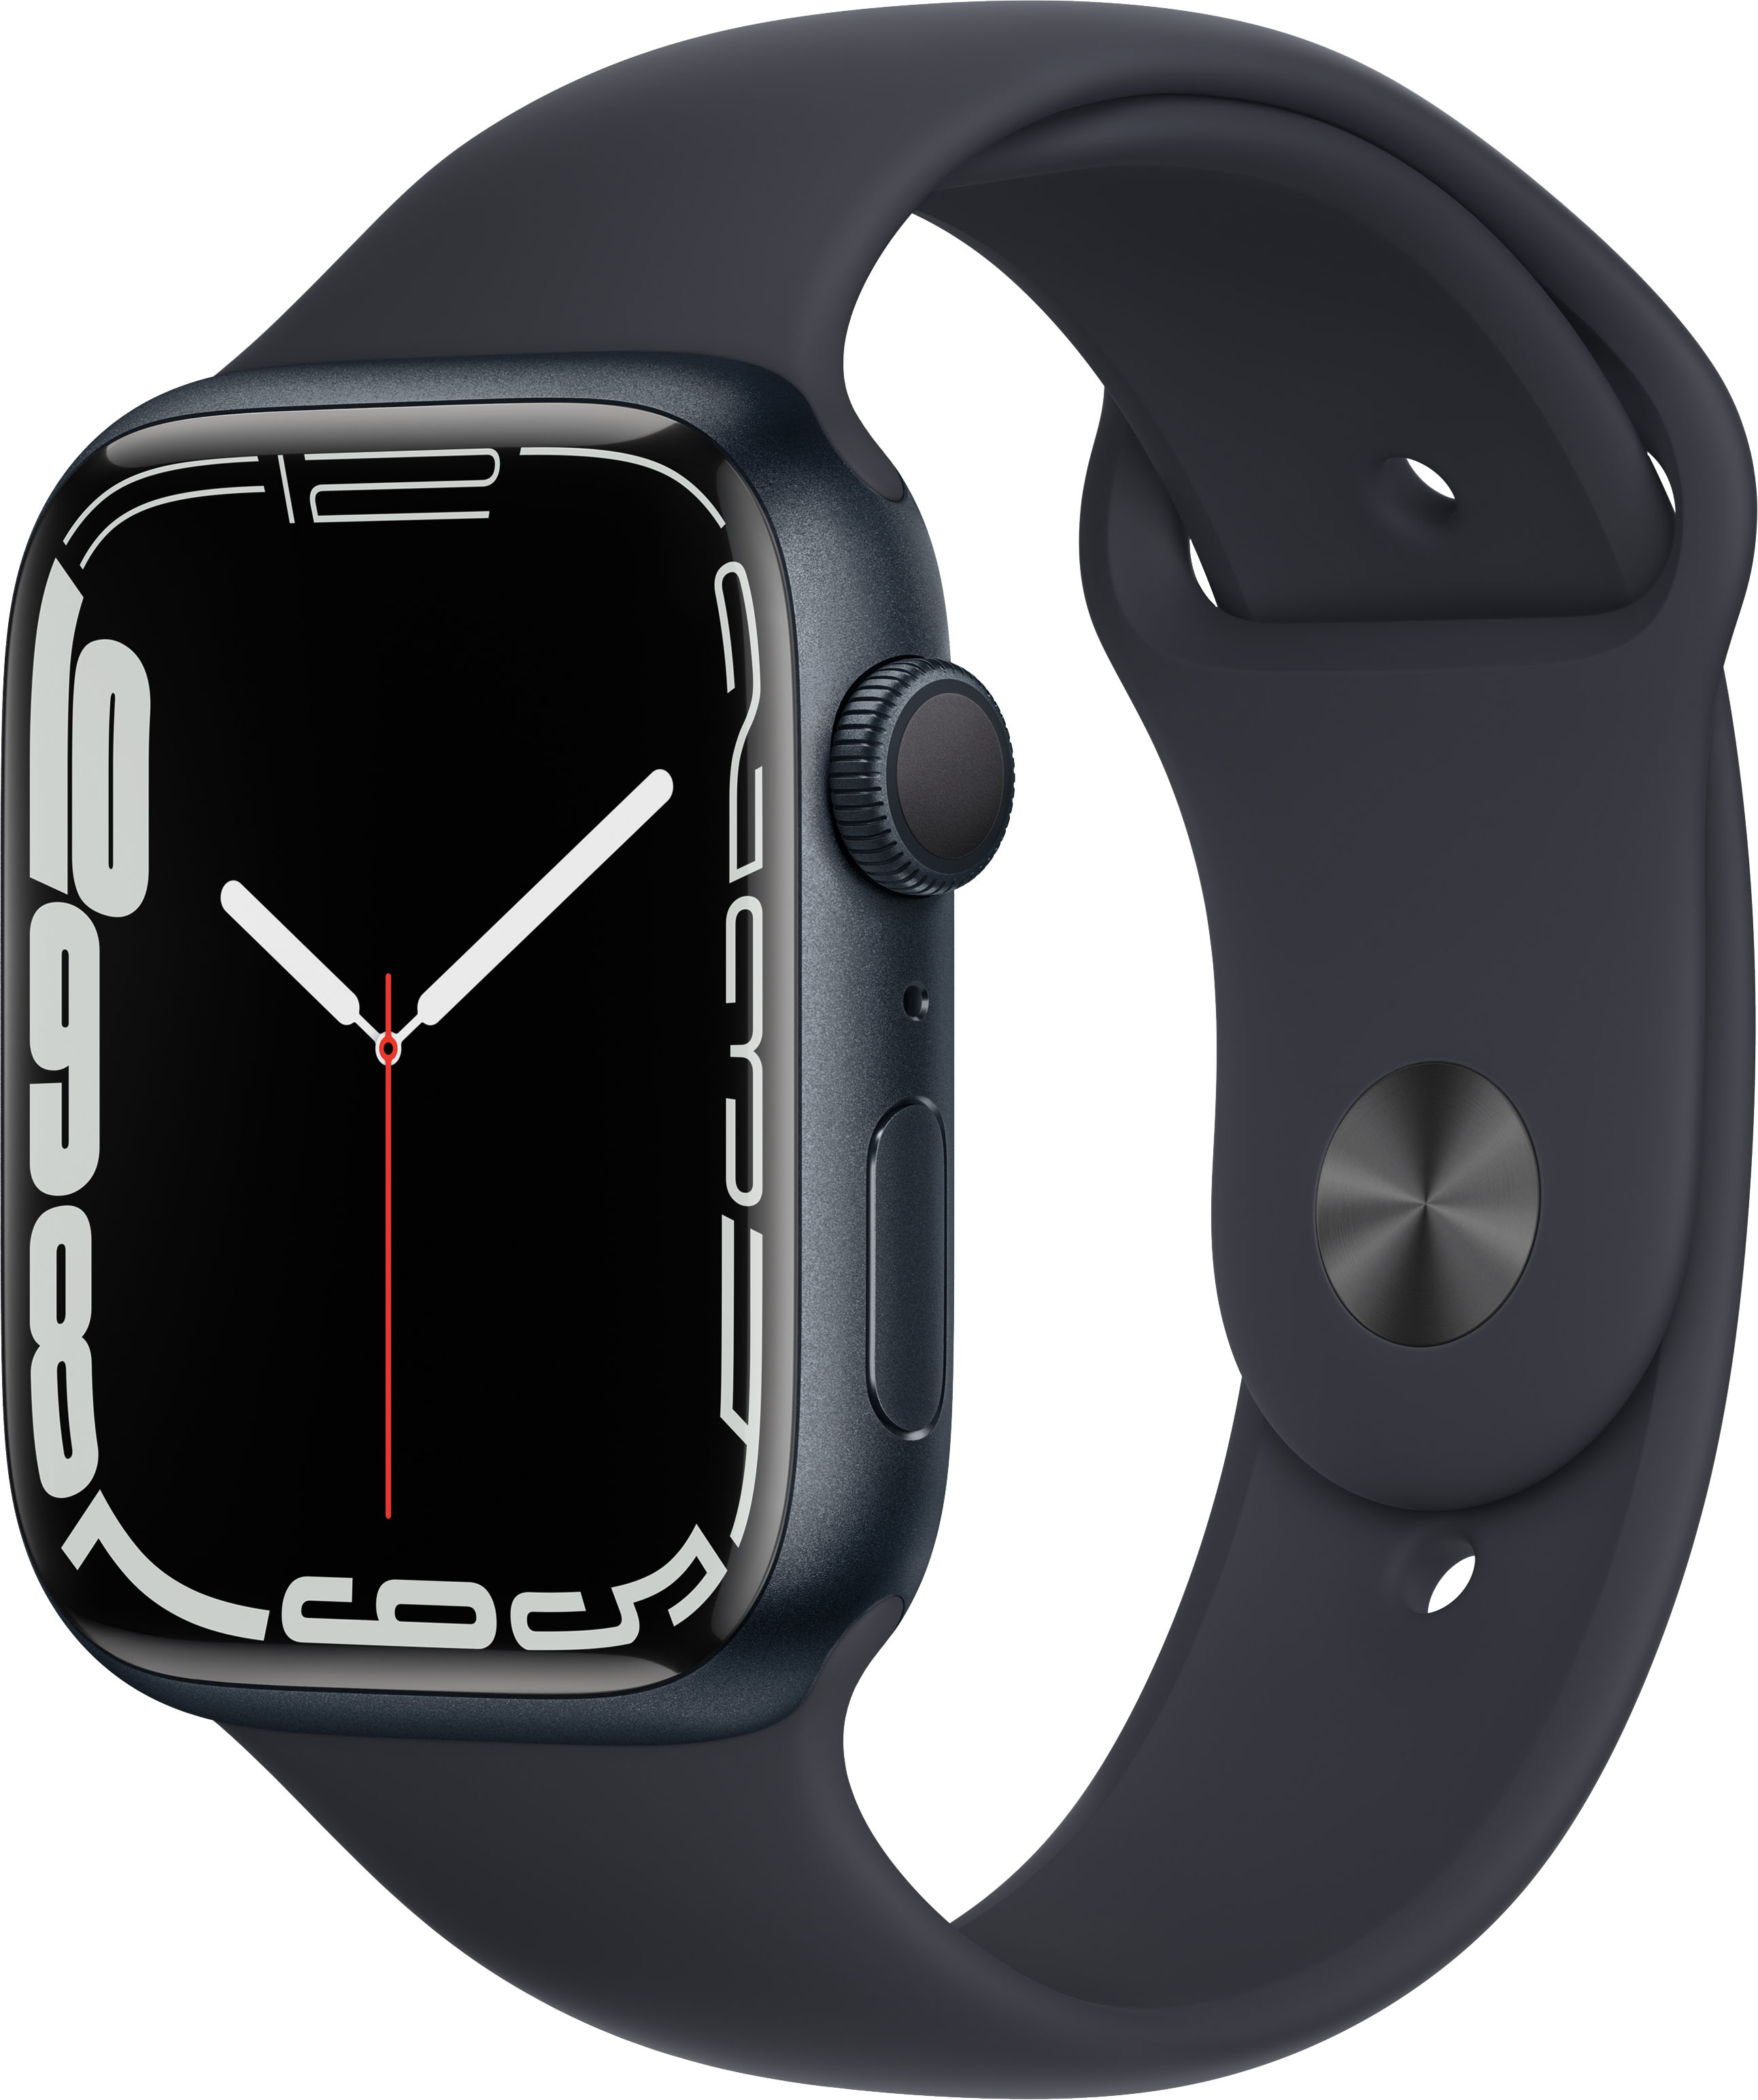 Apple Watch Series 7 (GPS) 45mm WAS $429.00 NOW $359.00 SAVE $70